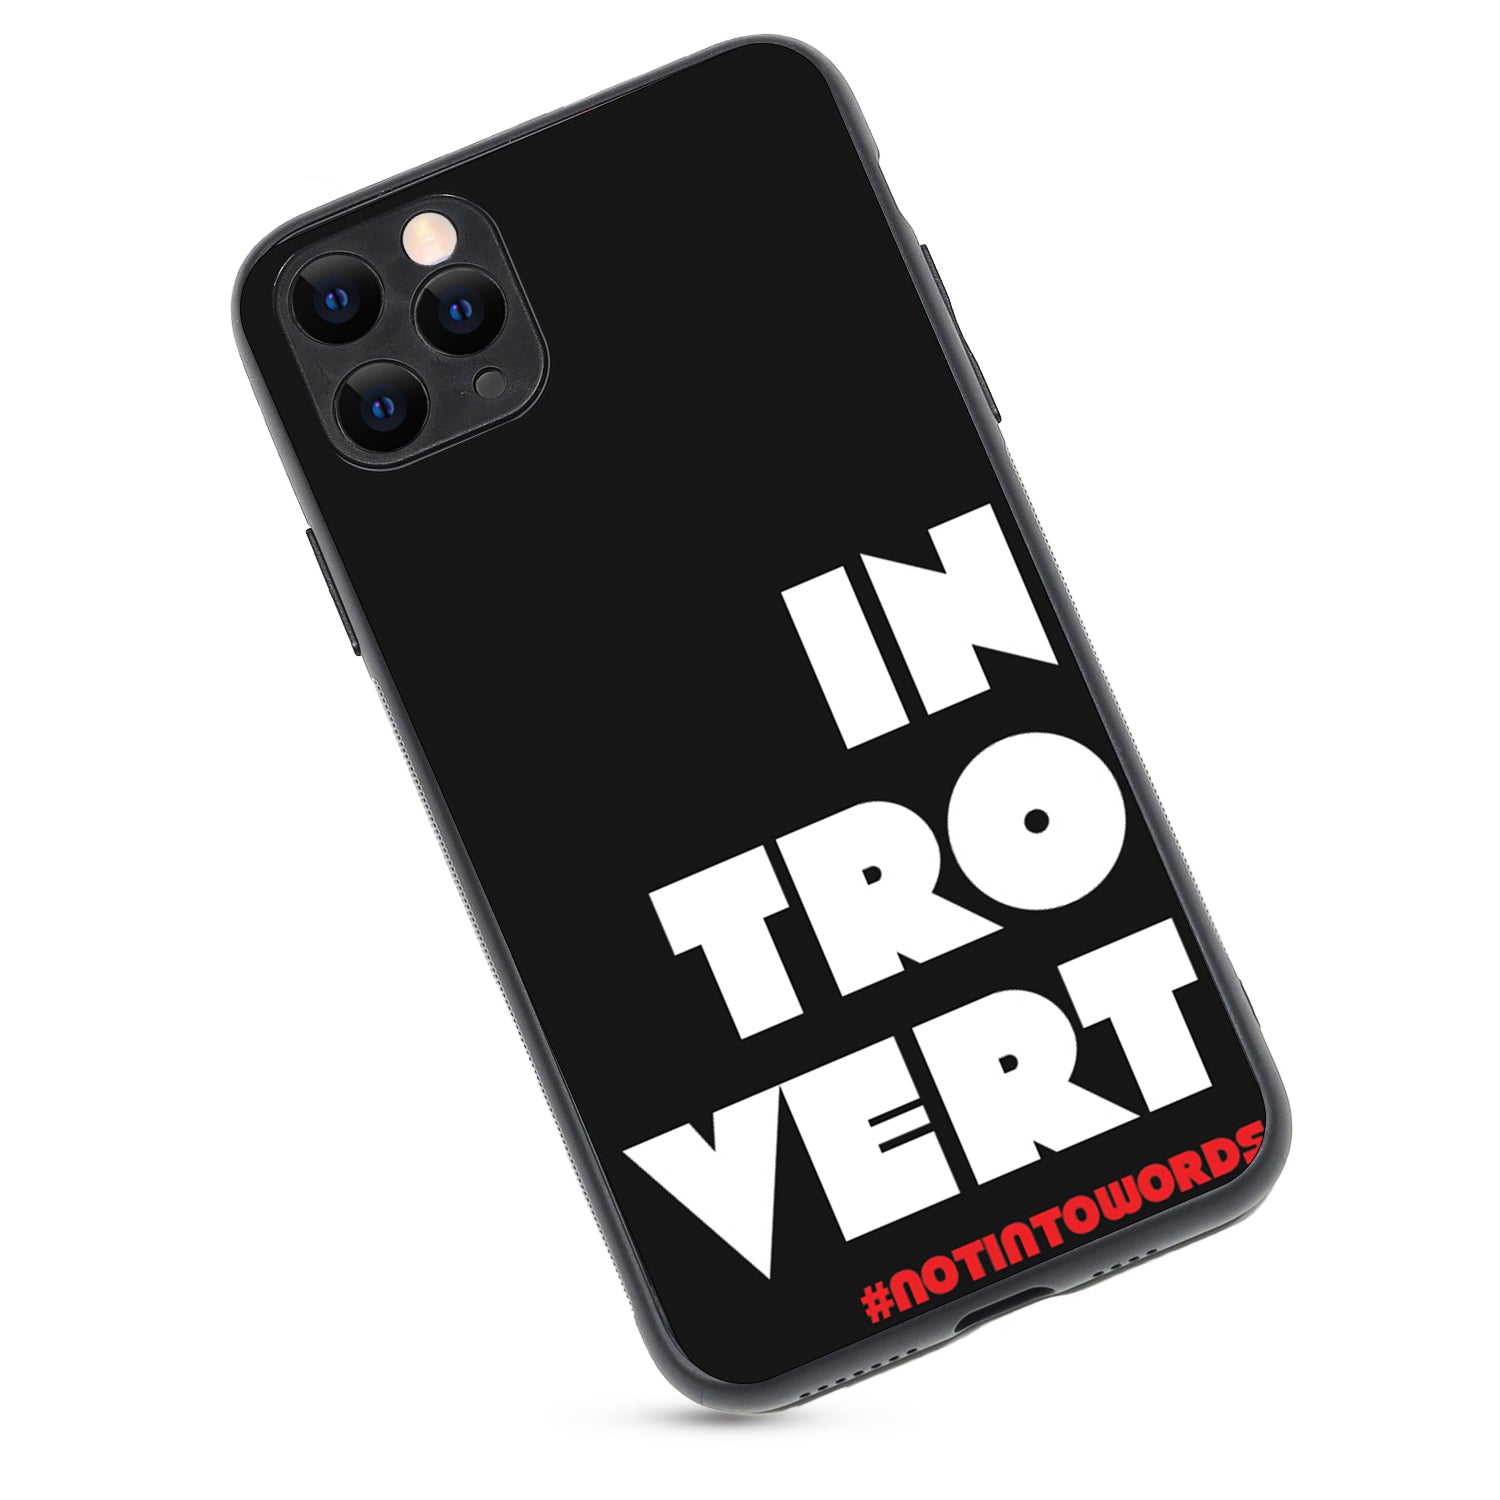 Introvert Motivational Quotes iPhone 11 Pro Max Case